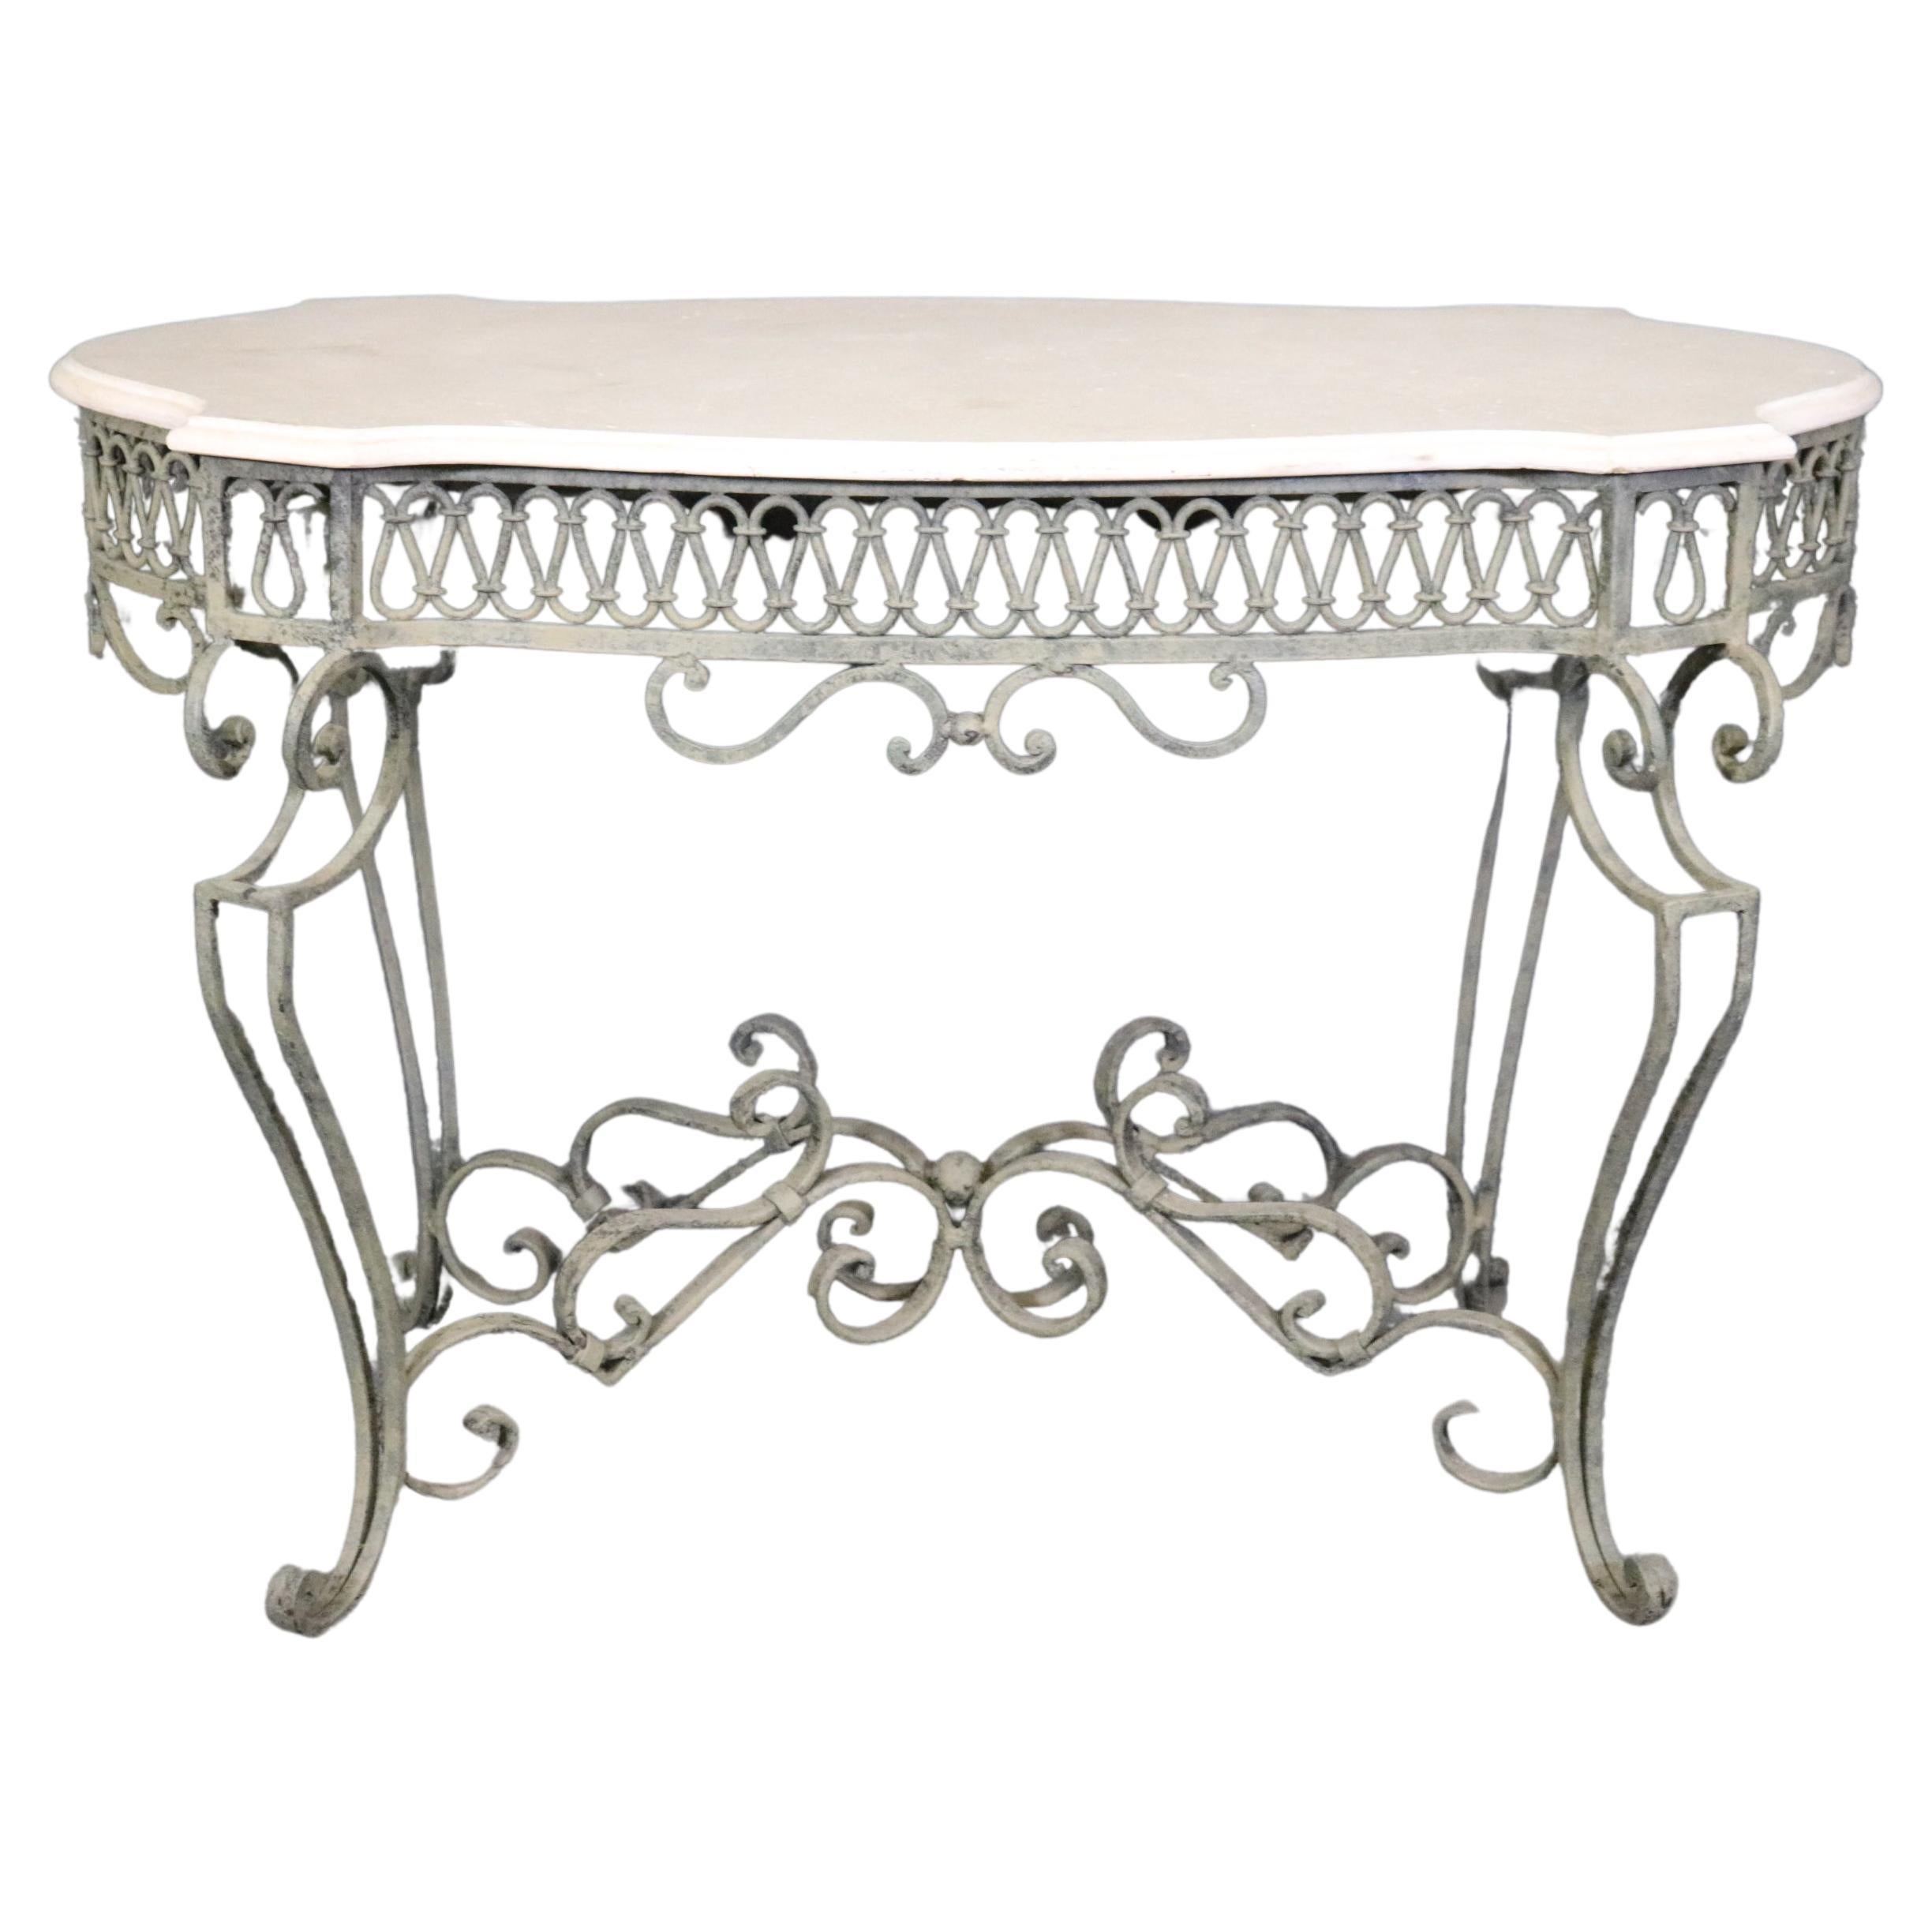 Wrought Iron Regency Style Travertine Top Center Table For Sale